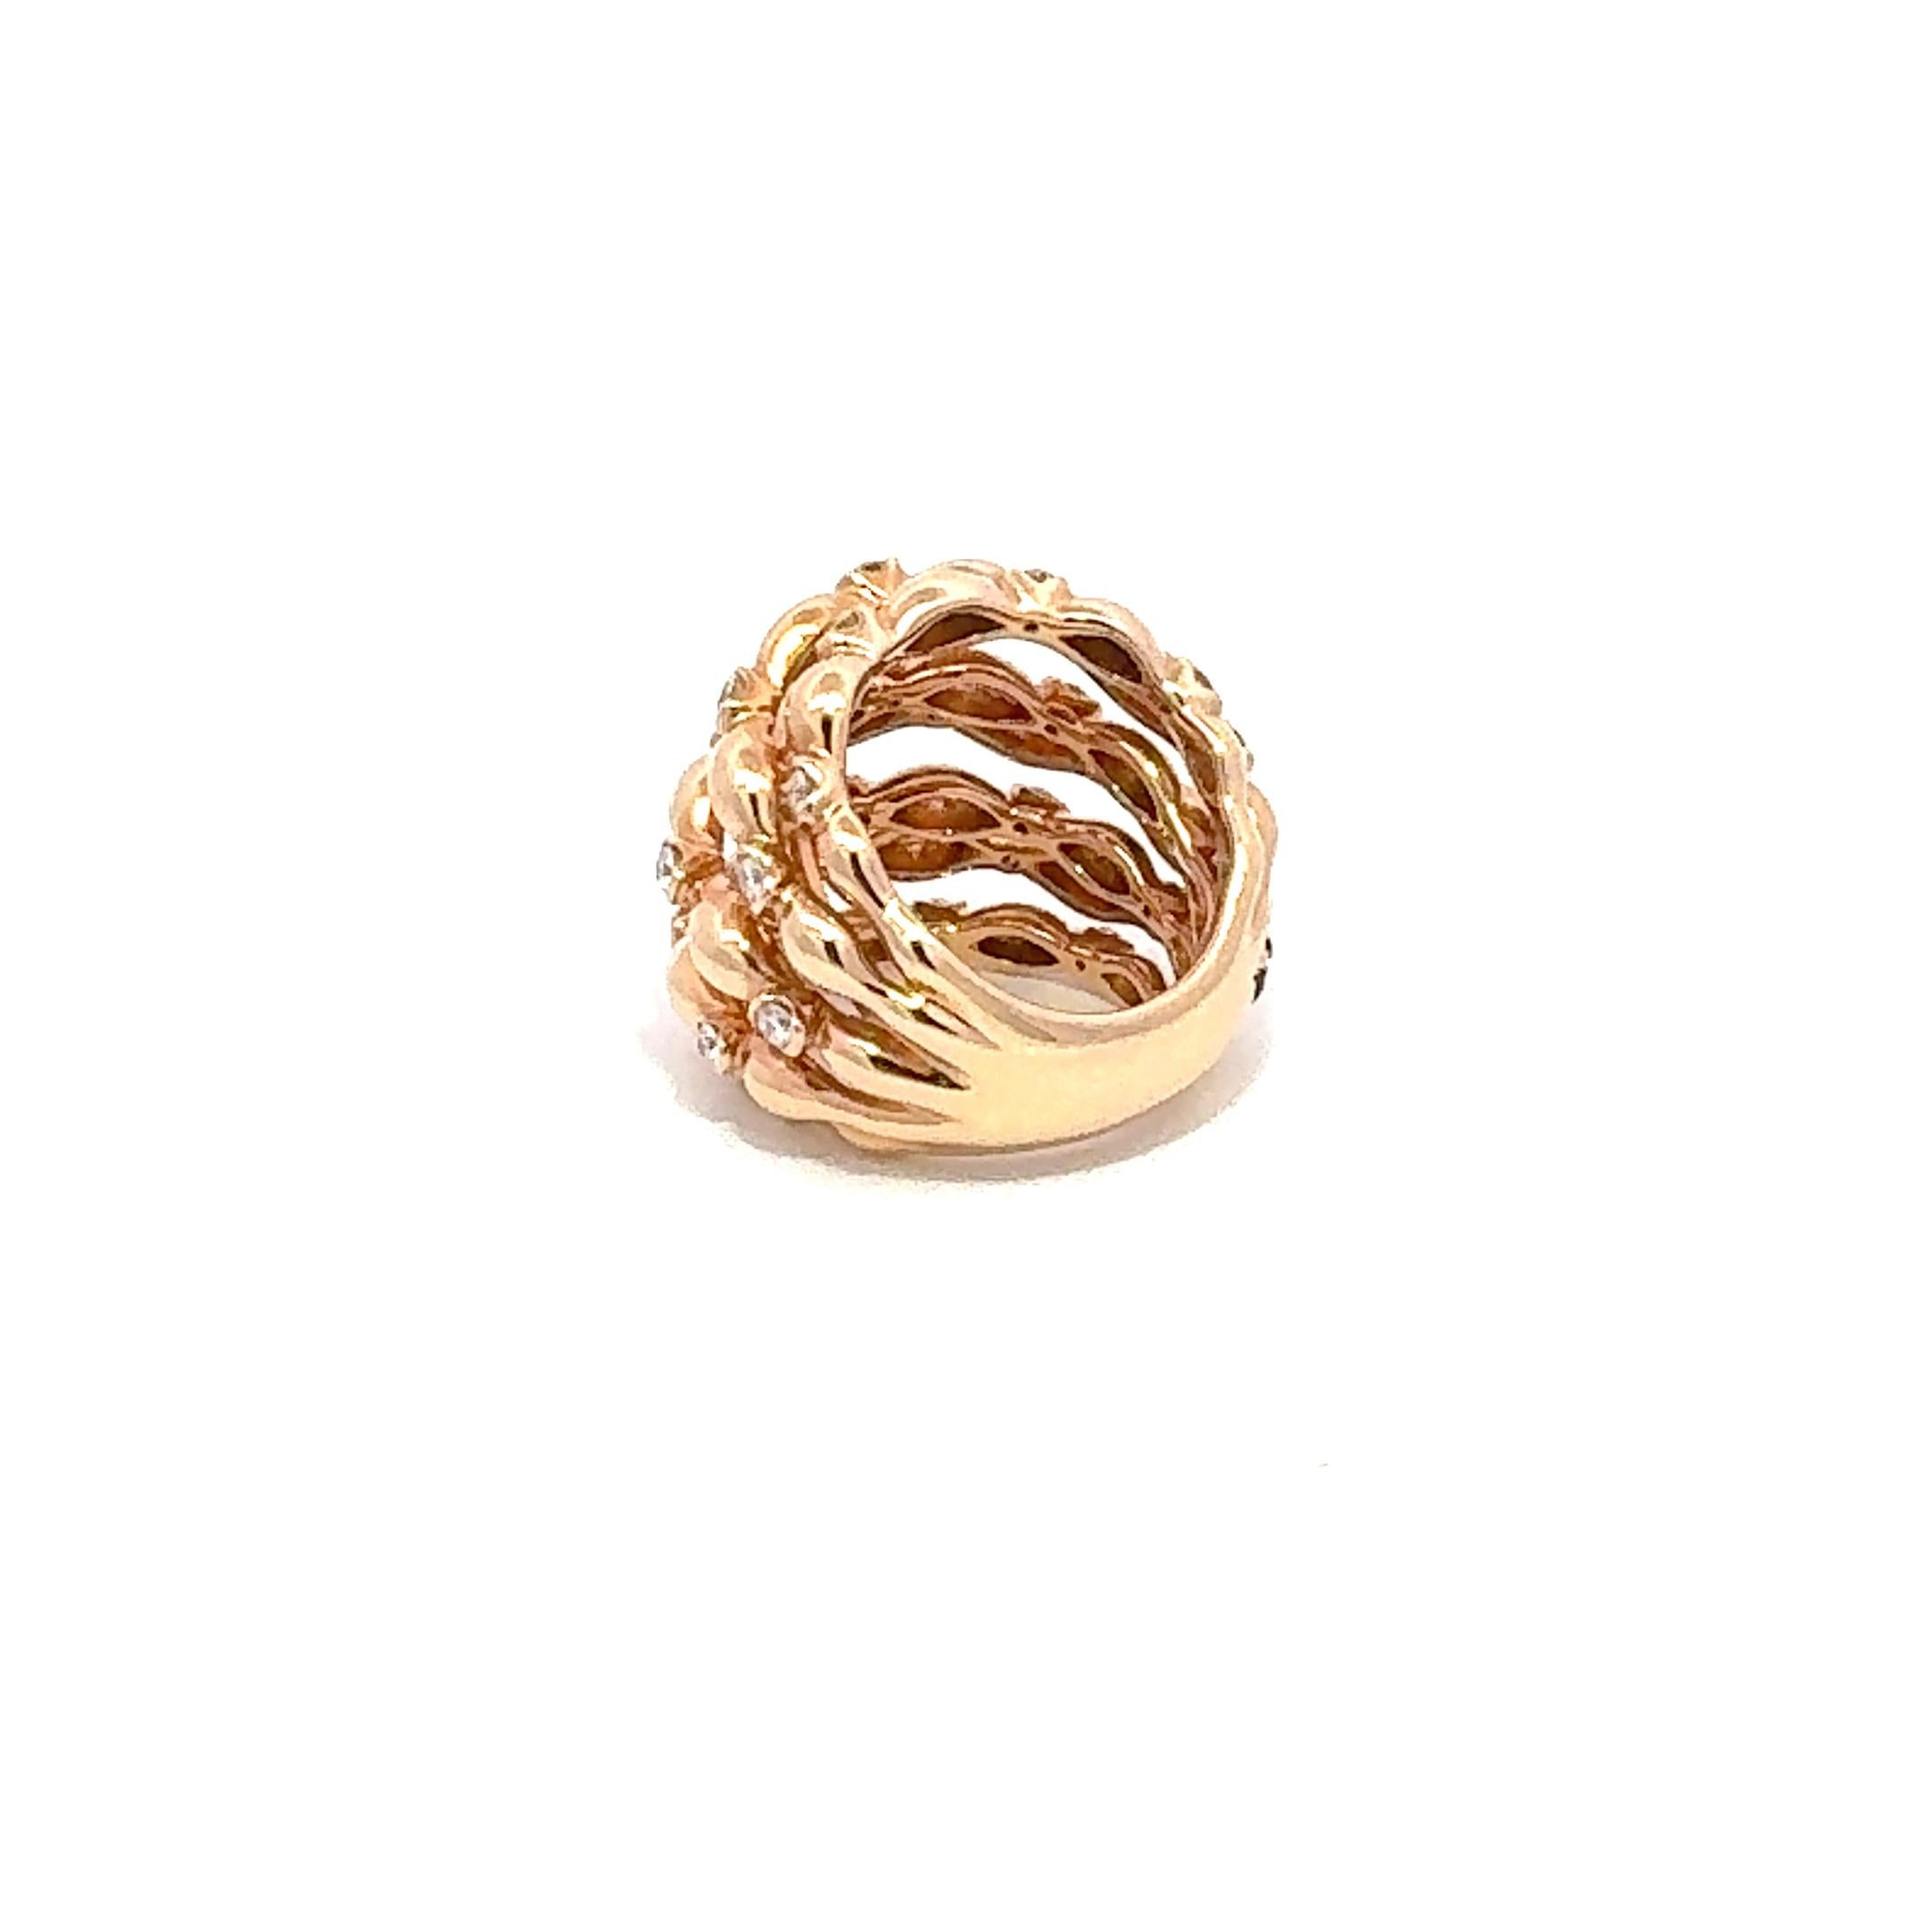 Ring (Matching Earrings Available)

18K Yellow Gold

Diamonds 1.36 ct

Weight 24 grams

With a heritage of ancient fine Swiss jewelry traditions, NATKINA is a Geneva based jewellery brand, which creates modern jewellery masterpieces suitable for